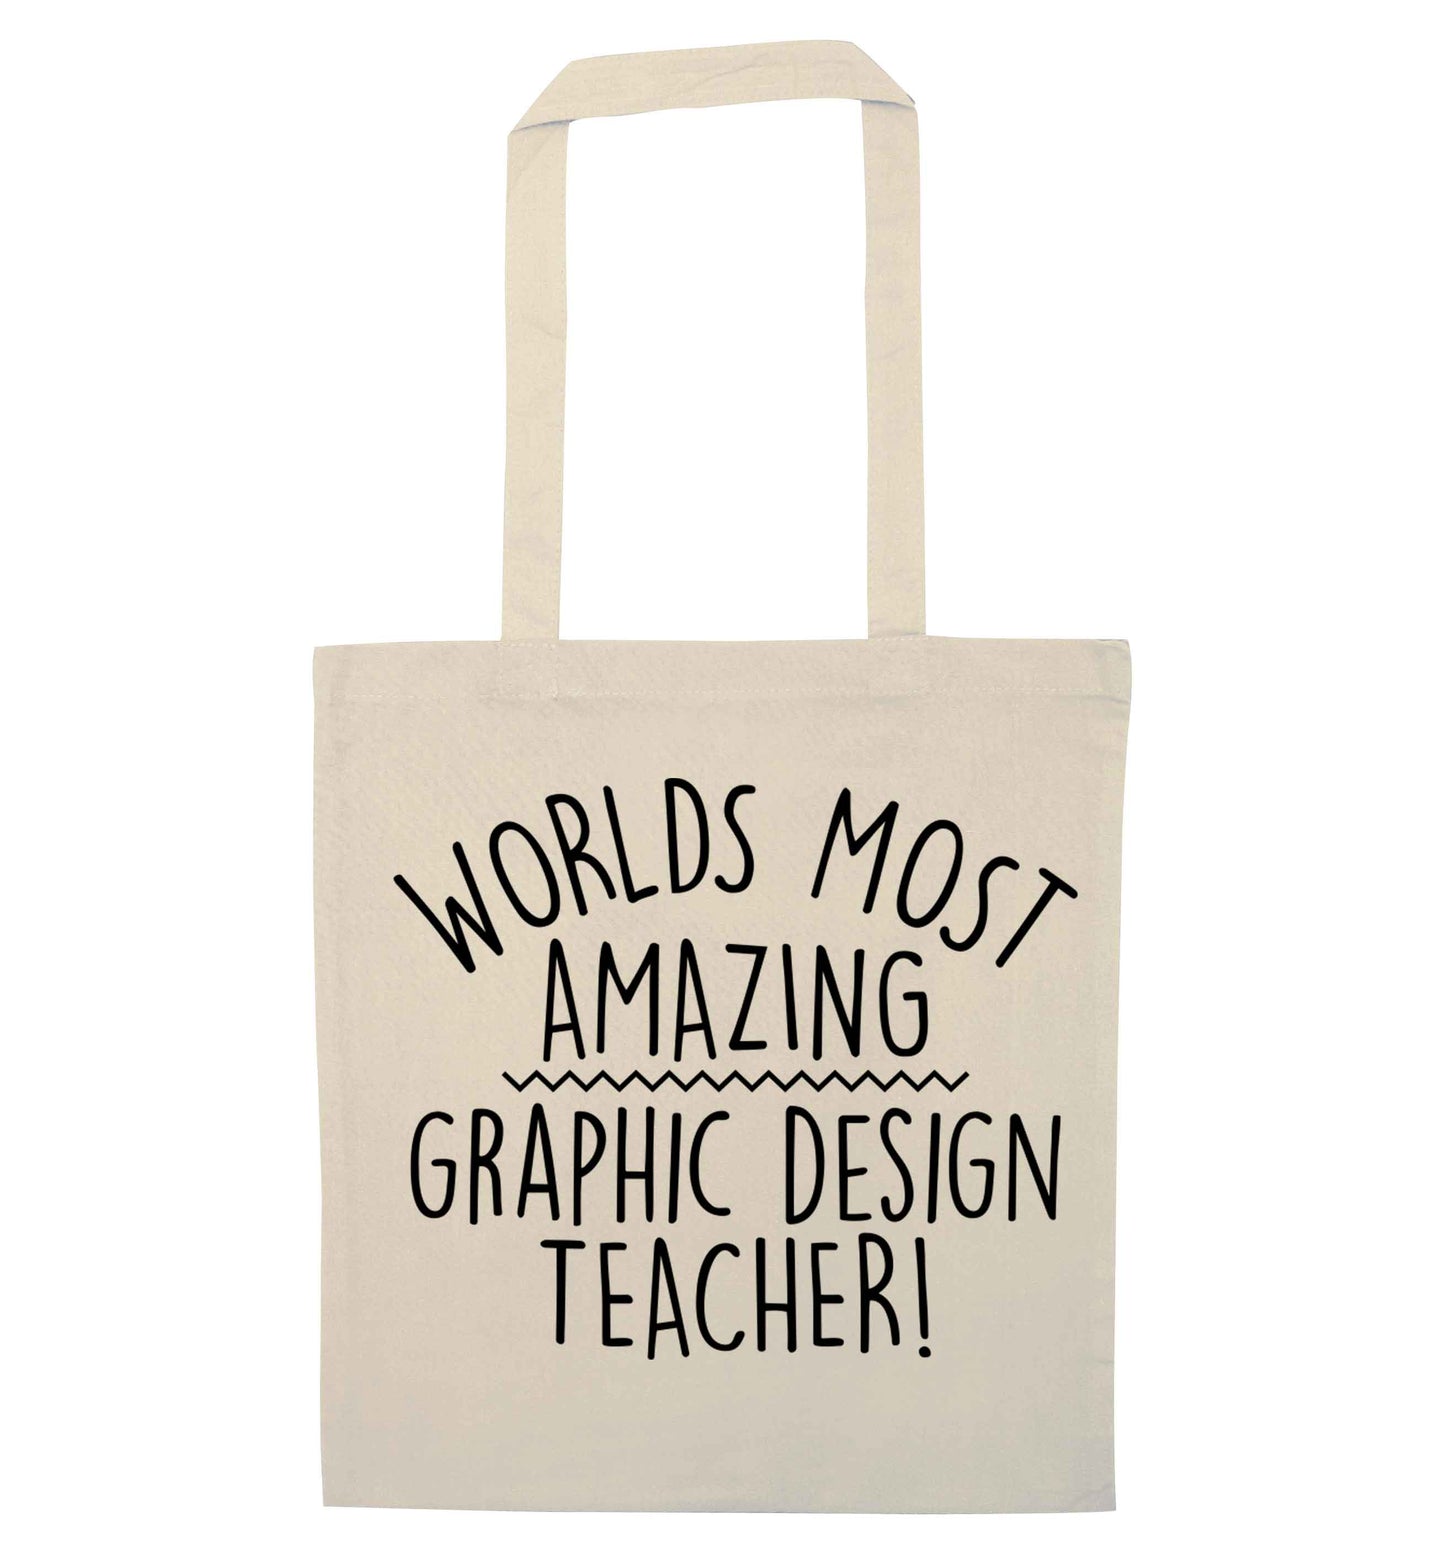 Worlds most amazing graphic design teacher natural tote bag